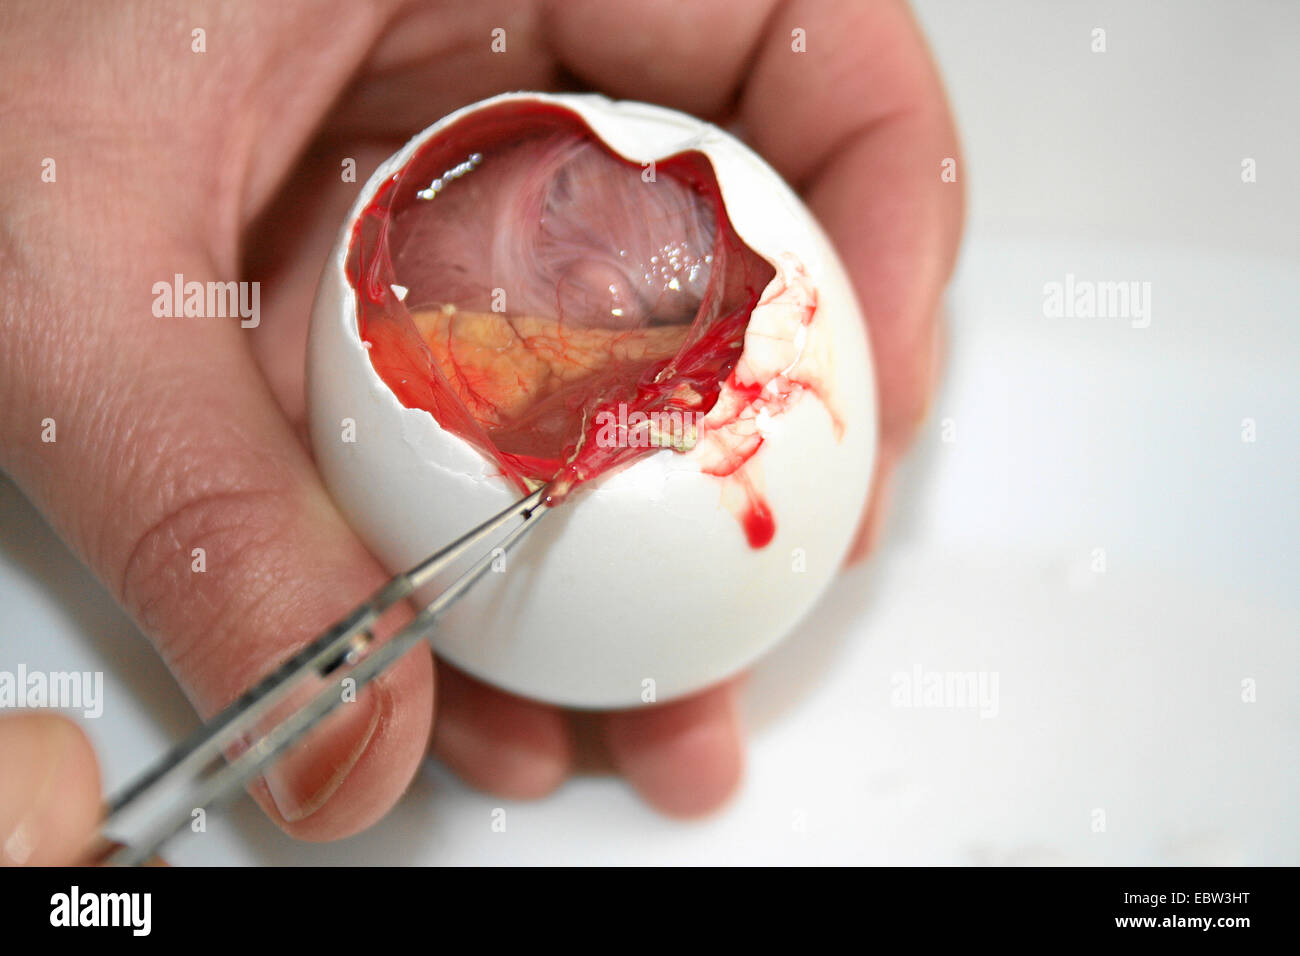 fertilized duck's egg called balut, being eaten in the Far East as delicacy and supposed aphrodisiac, is opened with a pair of pincers Stock Photo